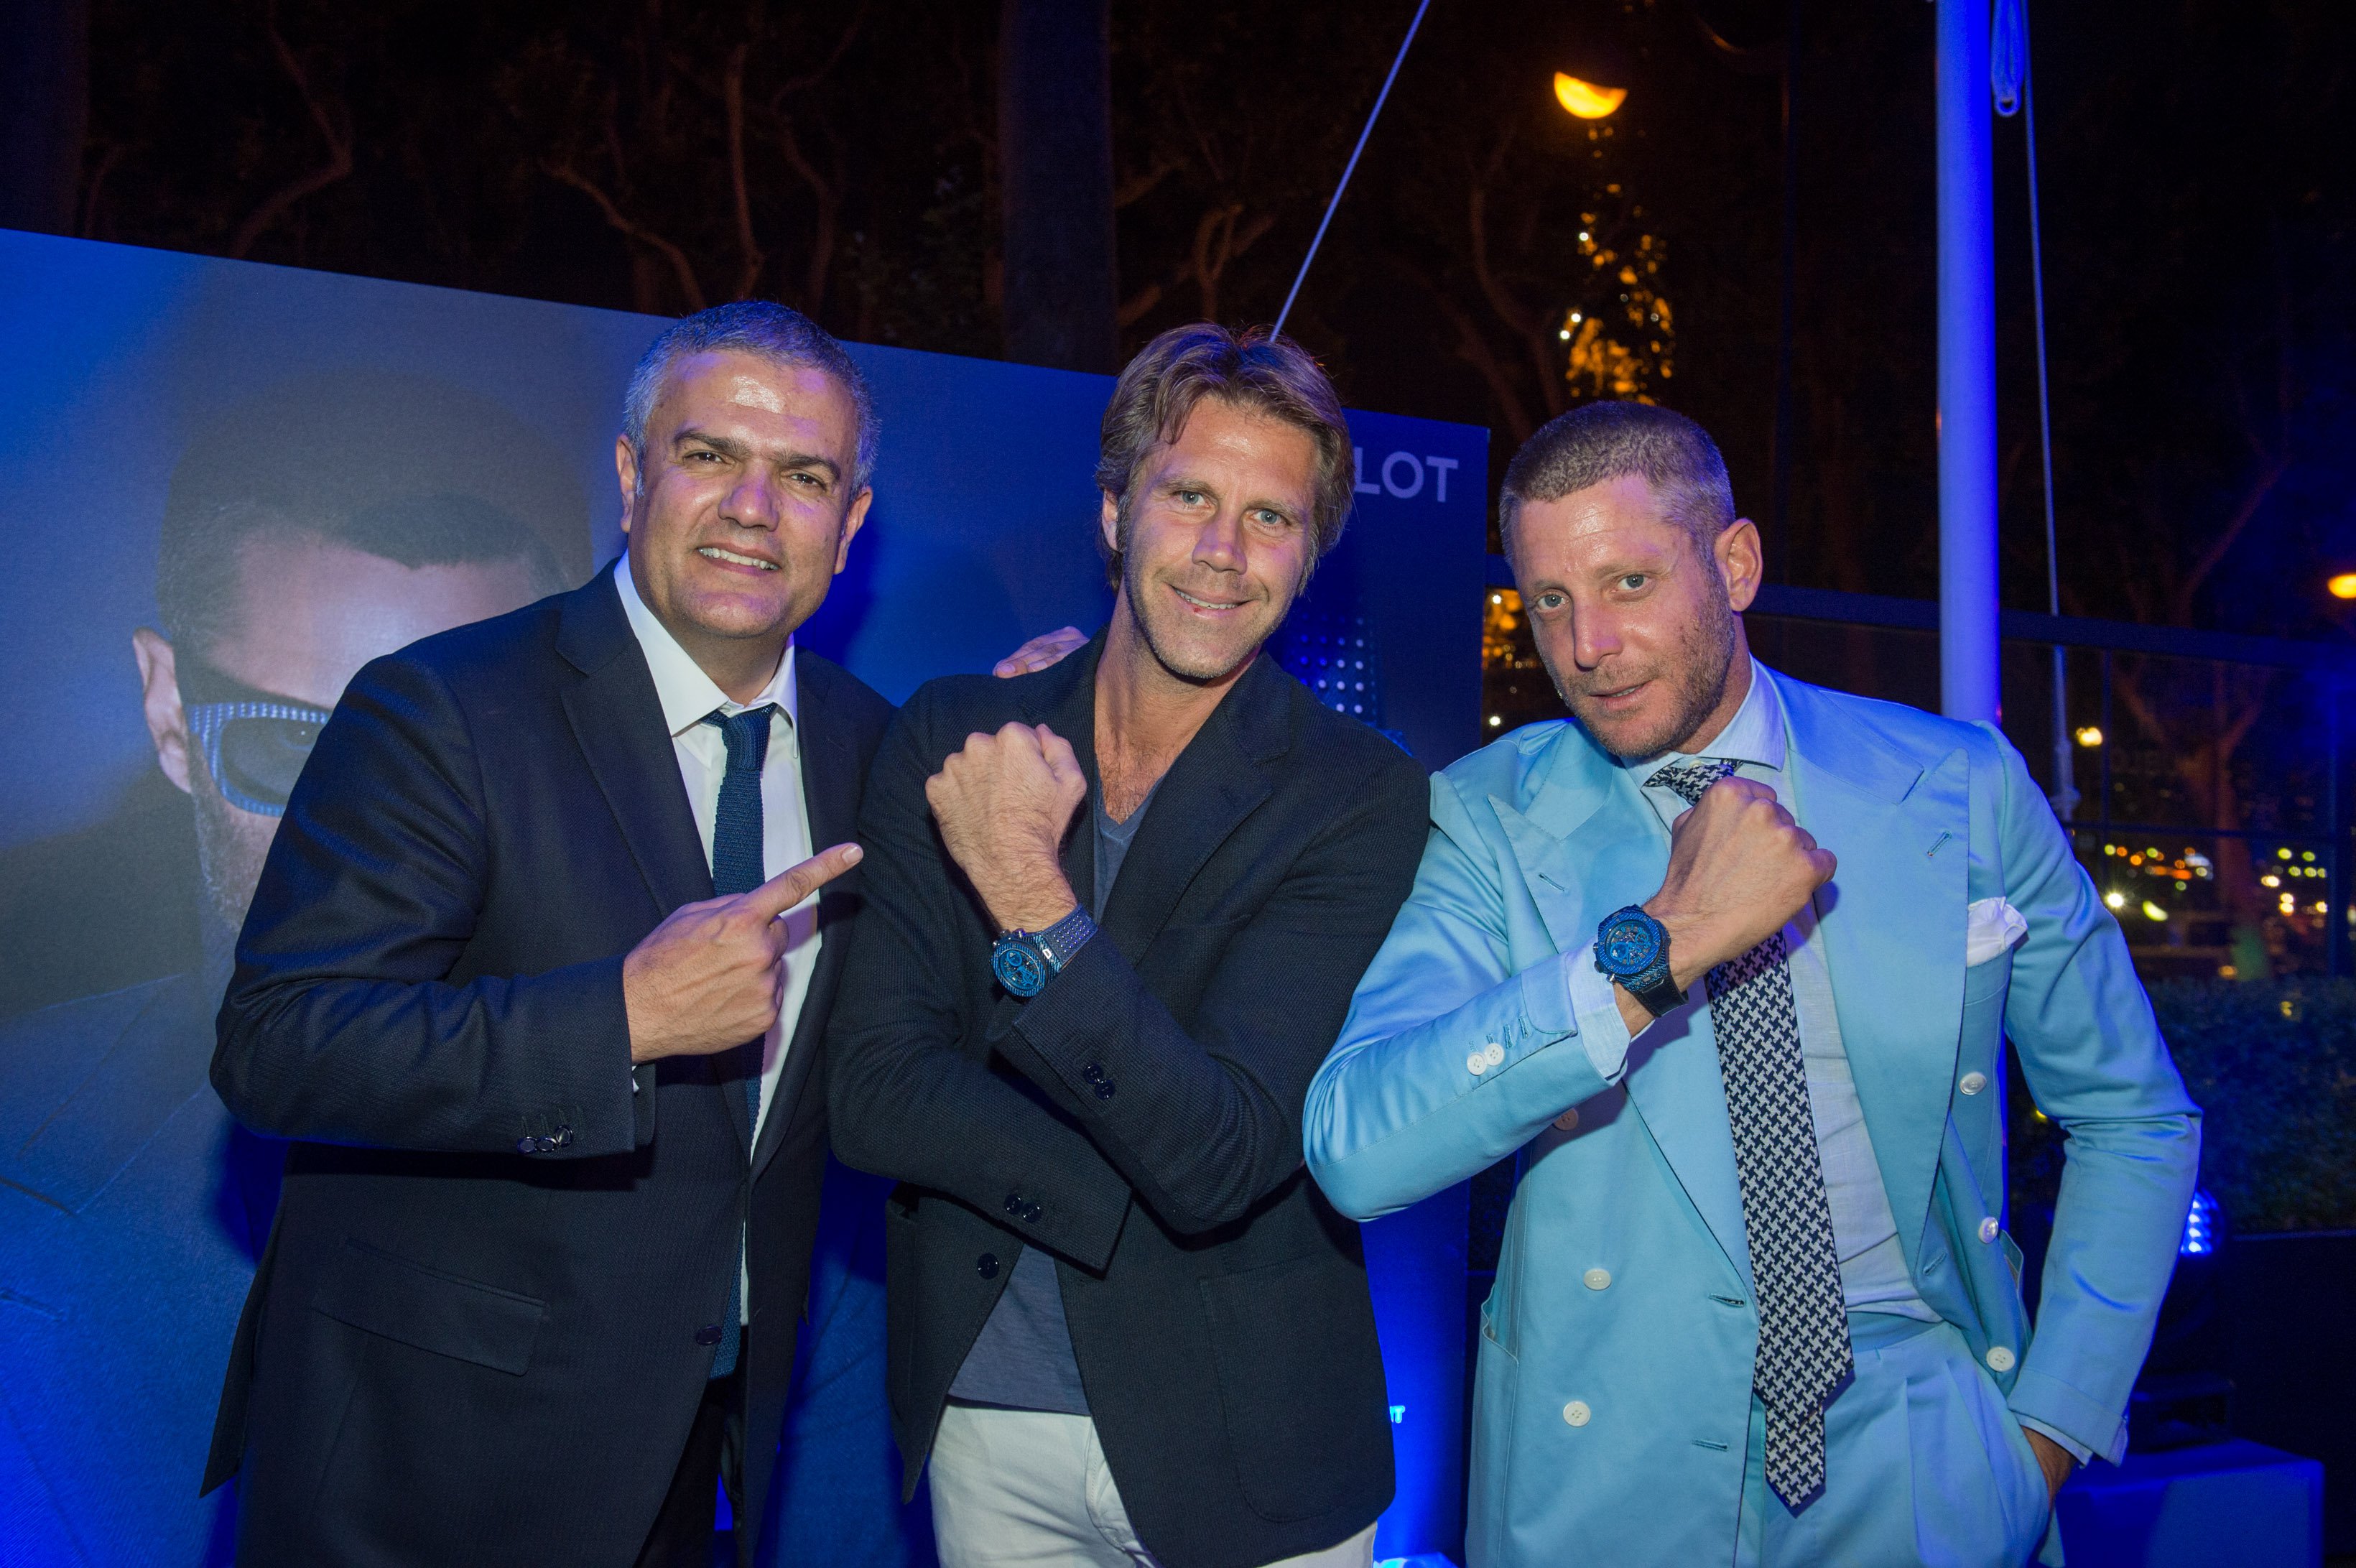 Paris Brings Together Two Style Giants With The Launch Of The Hublot Big Bang Unico Italia Independent